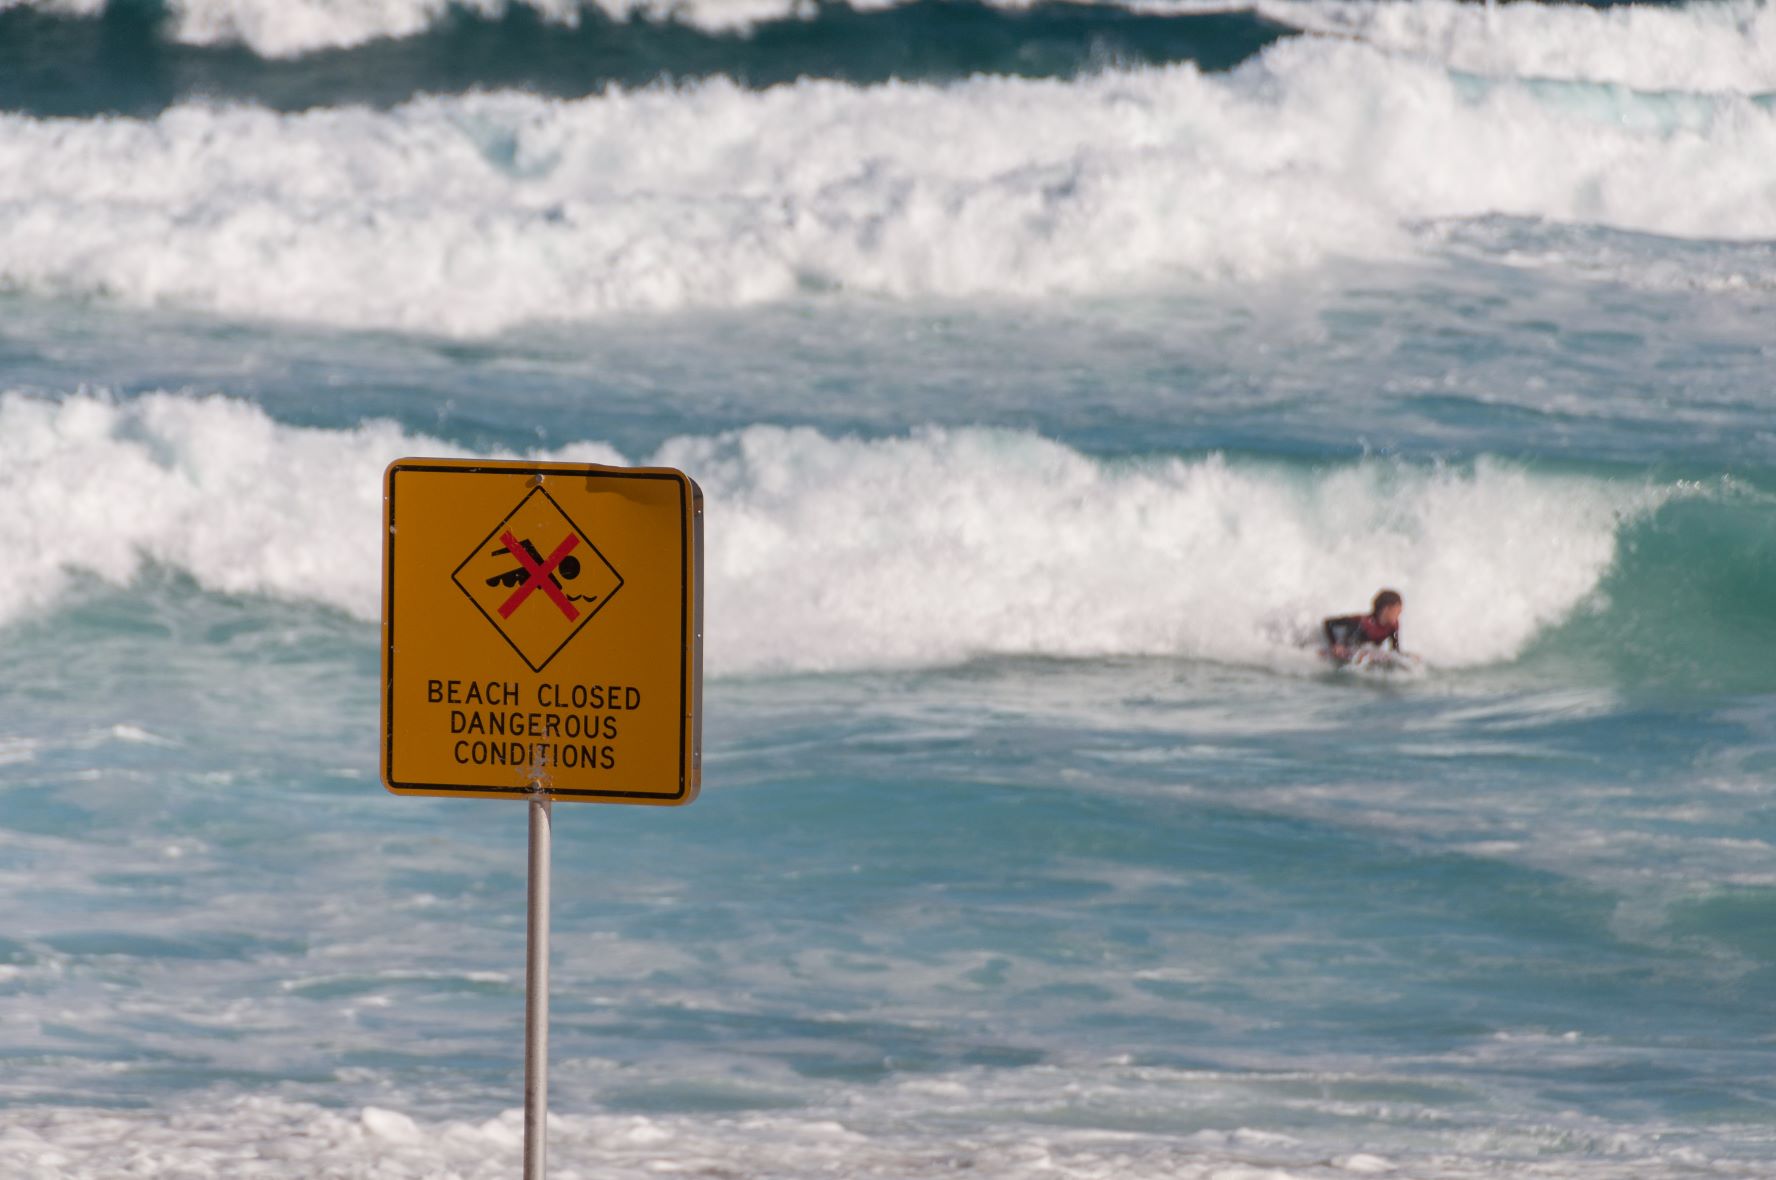 waves with "beach closed" sign